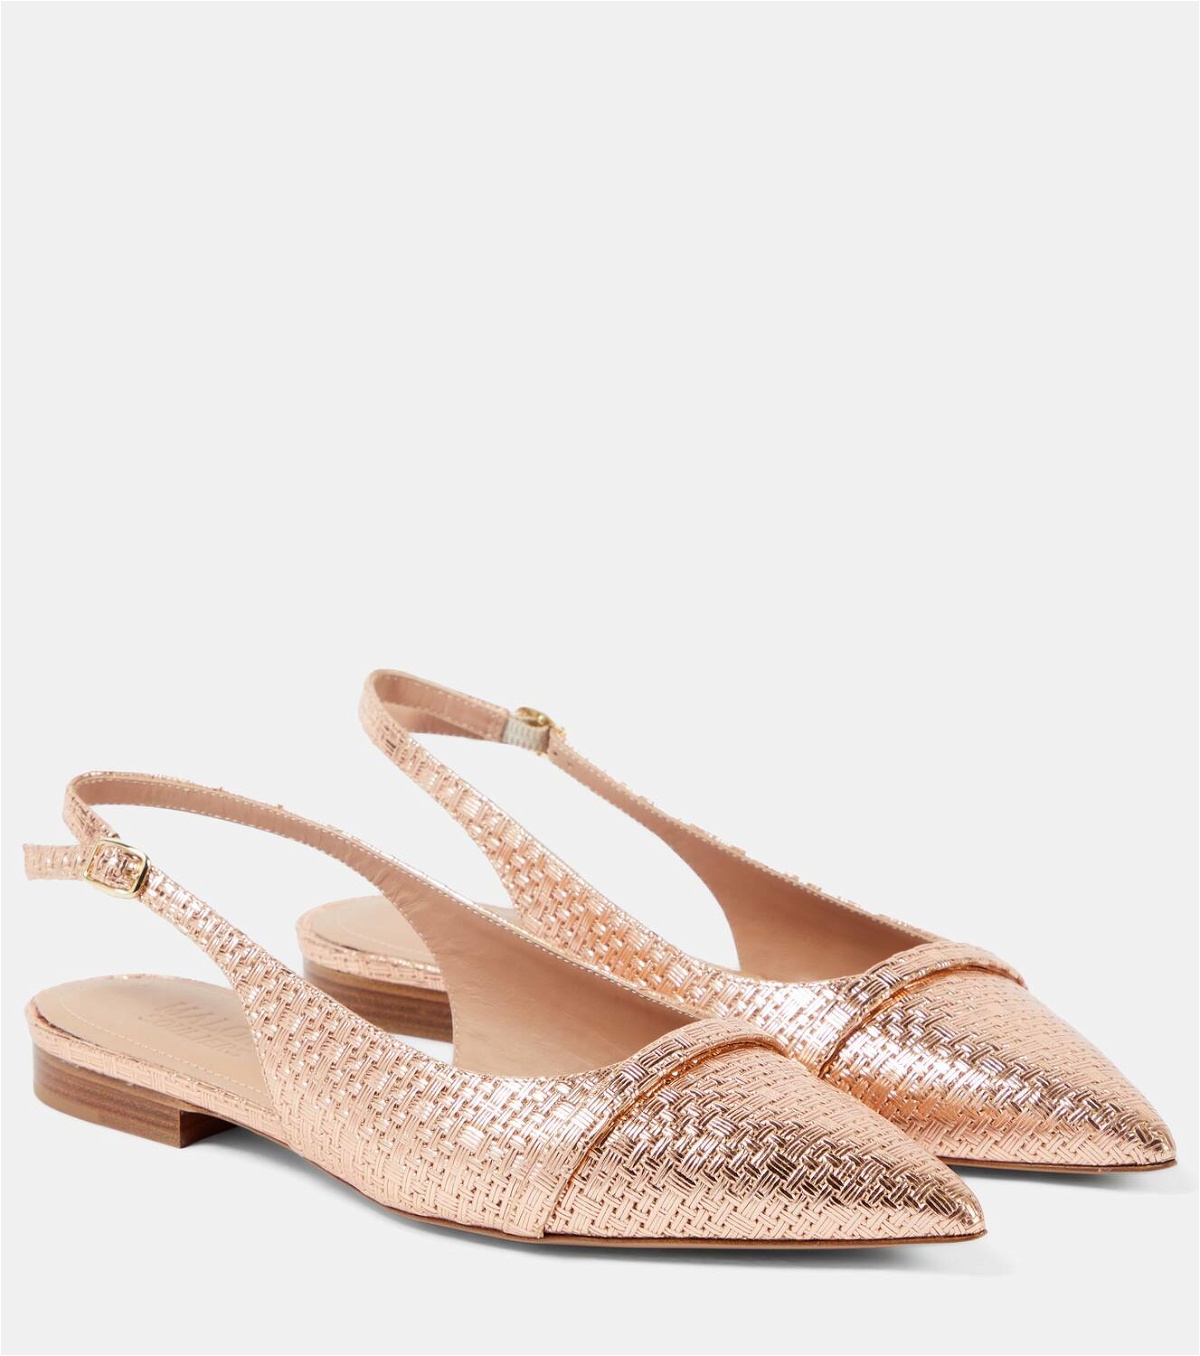 Malone Souliers Jama embossed leather slingback flats Malone Souliers